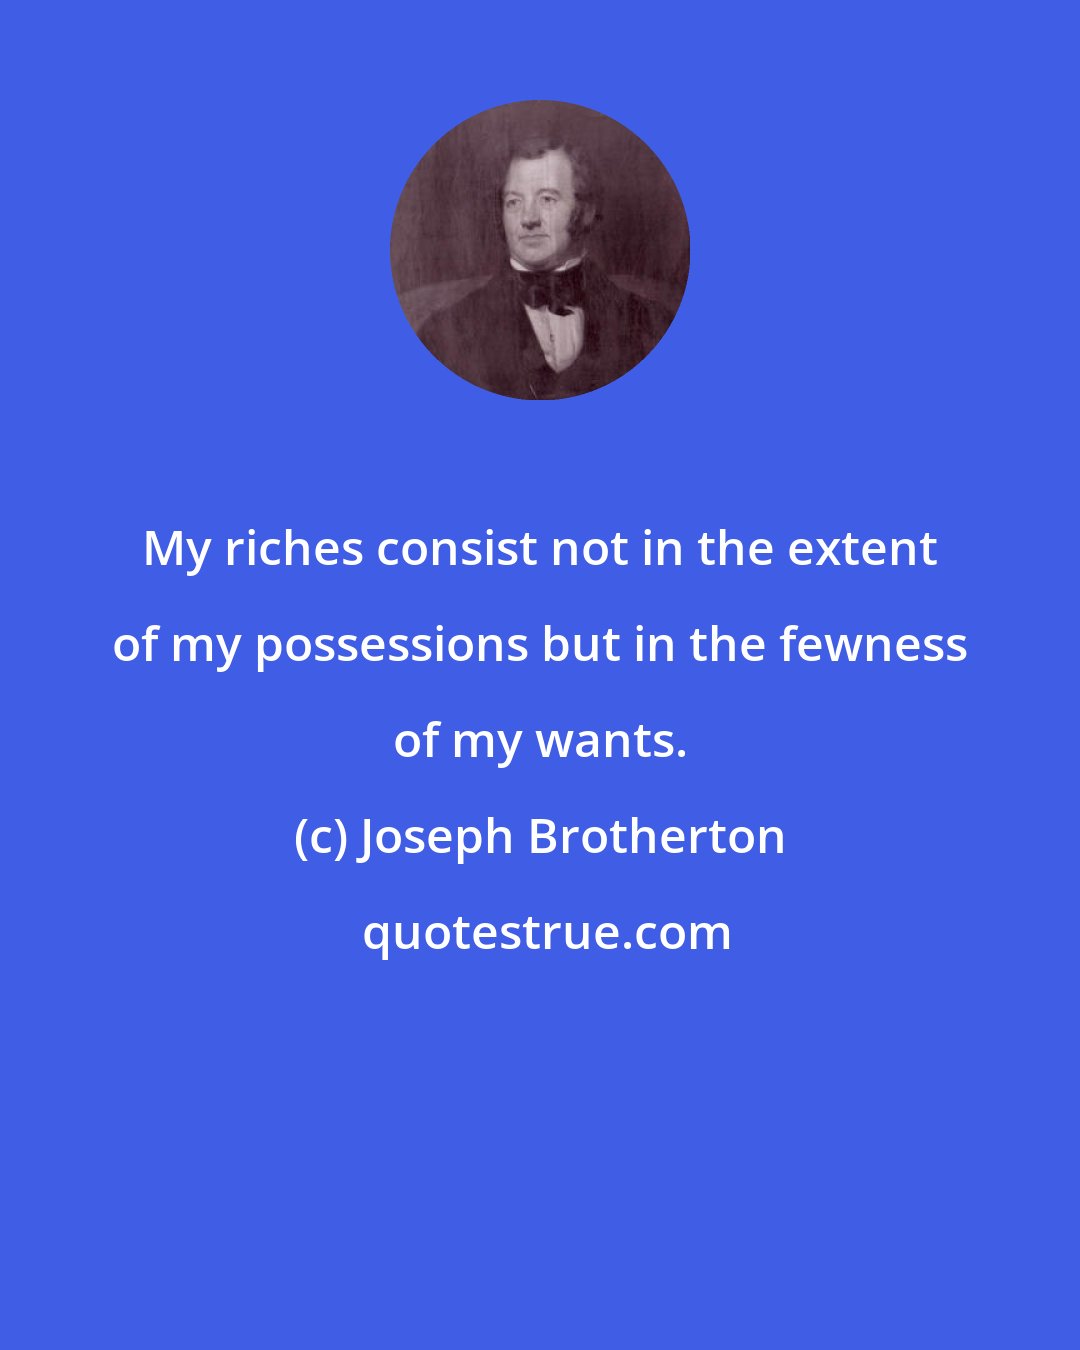 Joseph Brotherton: My riches consist not in the extent of my possessions but in the fewness of my wants.